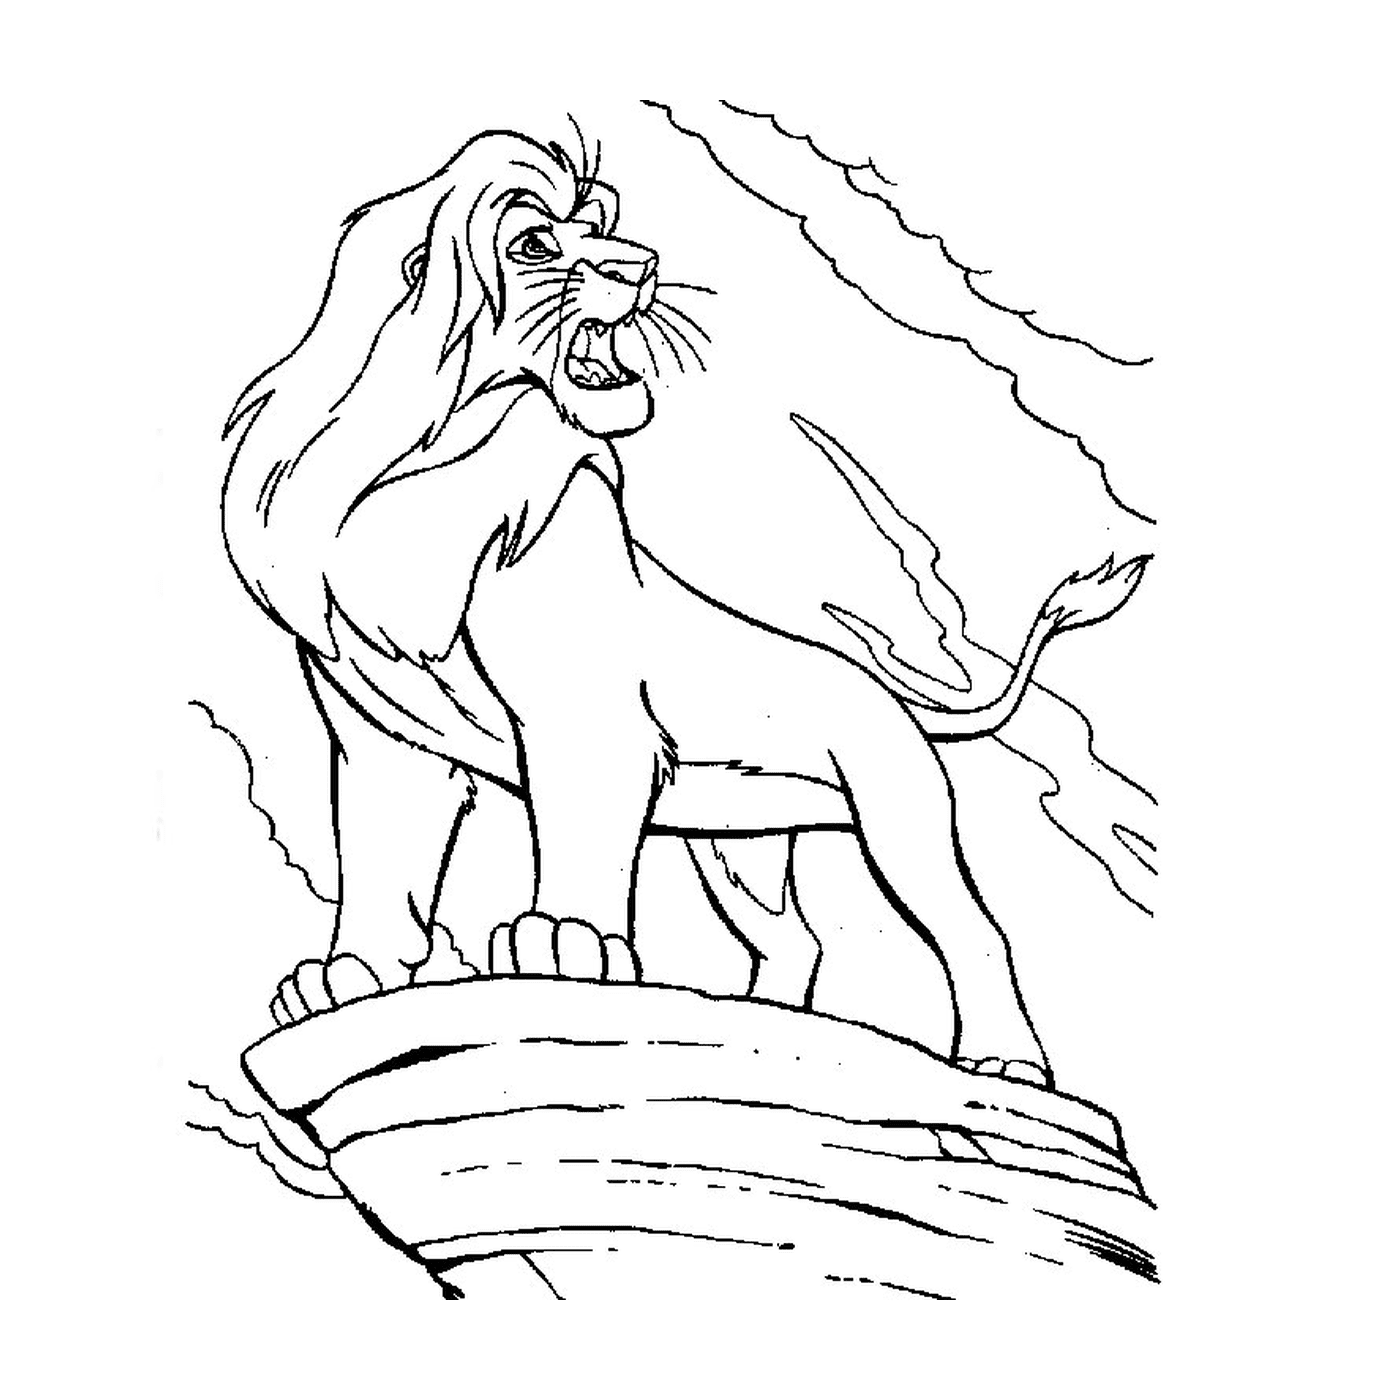  A lion standing on top of a ledge 